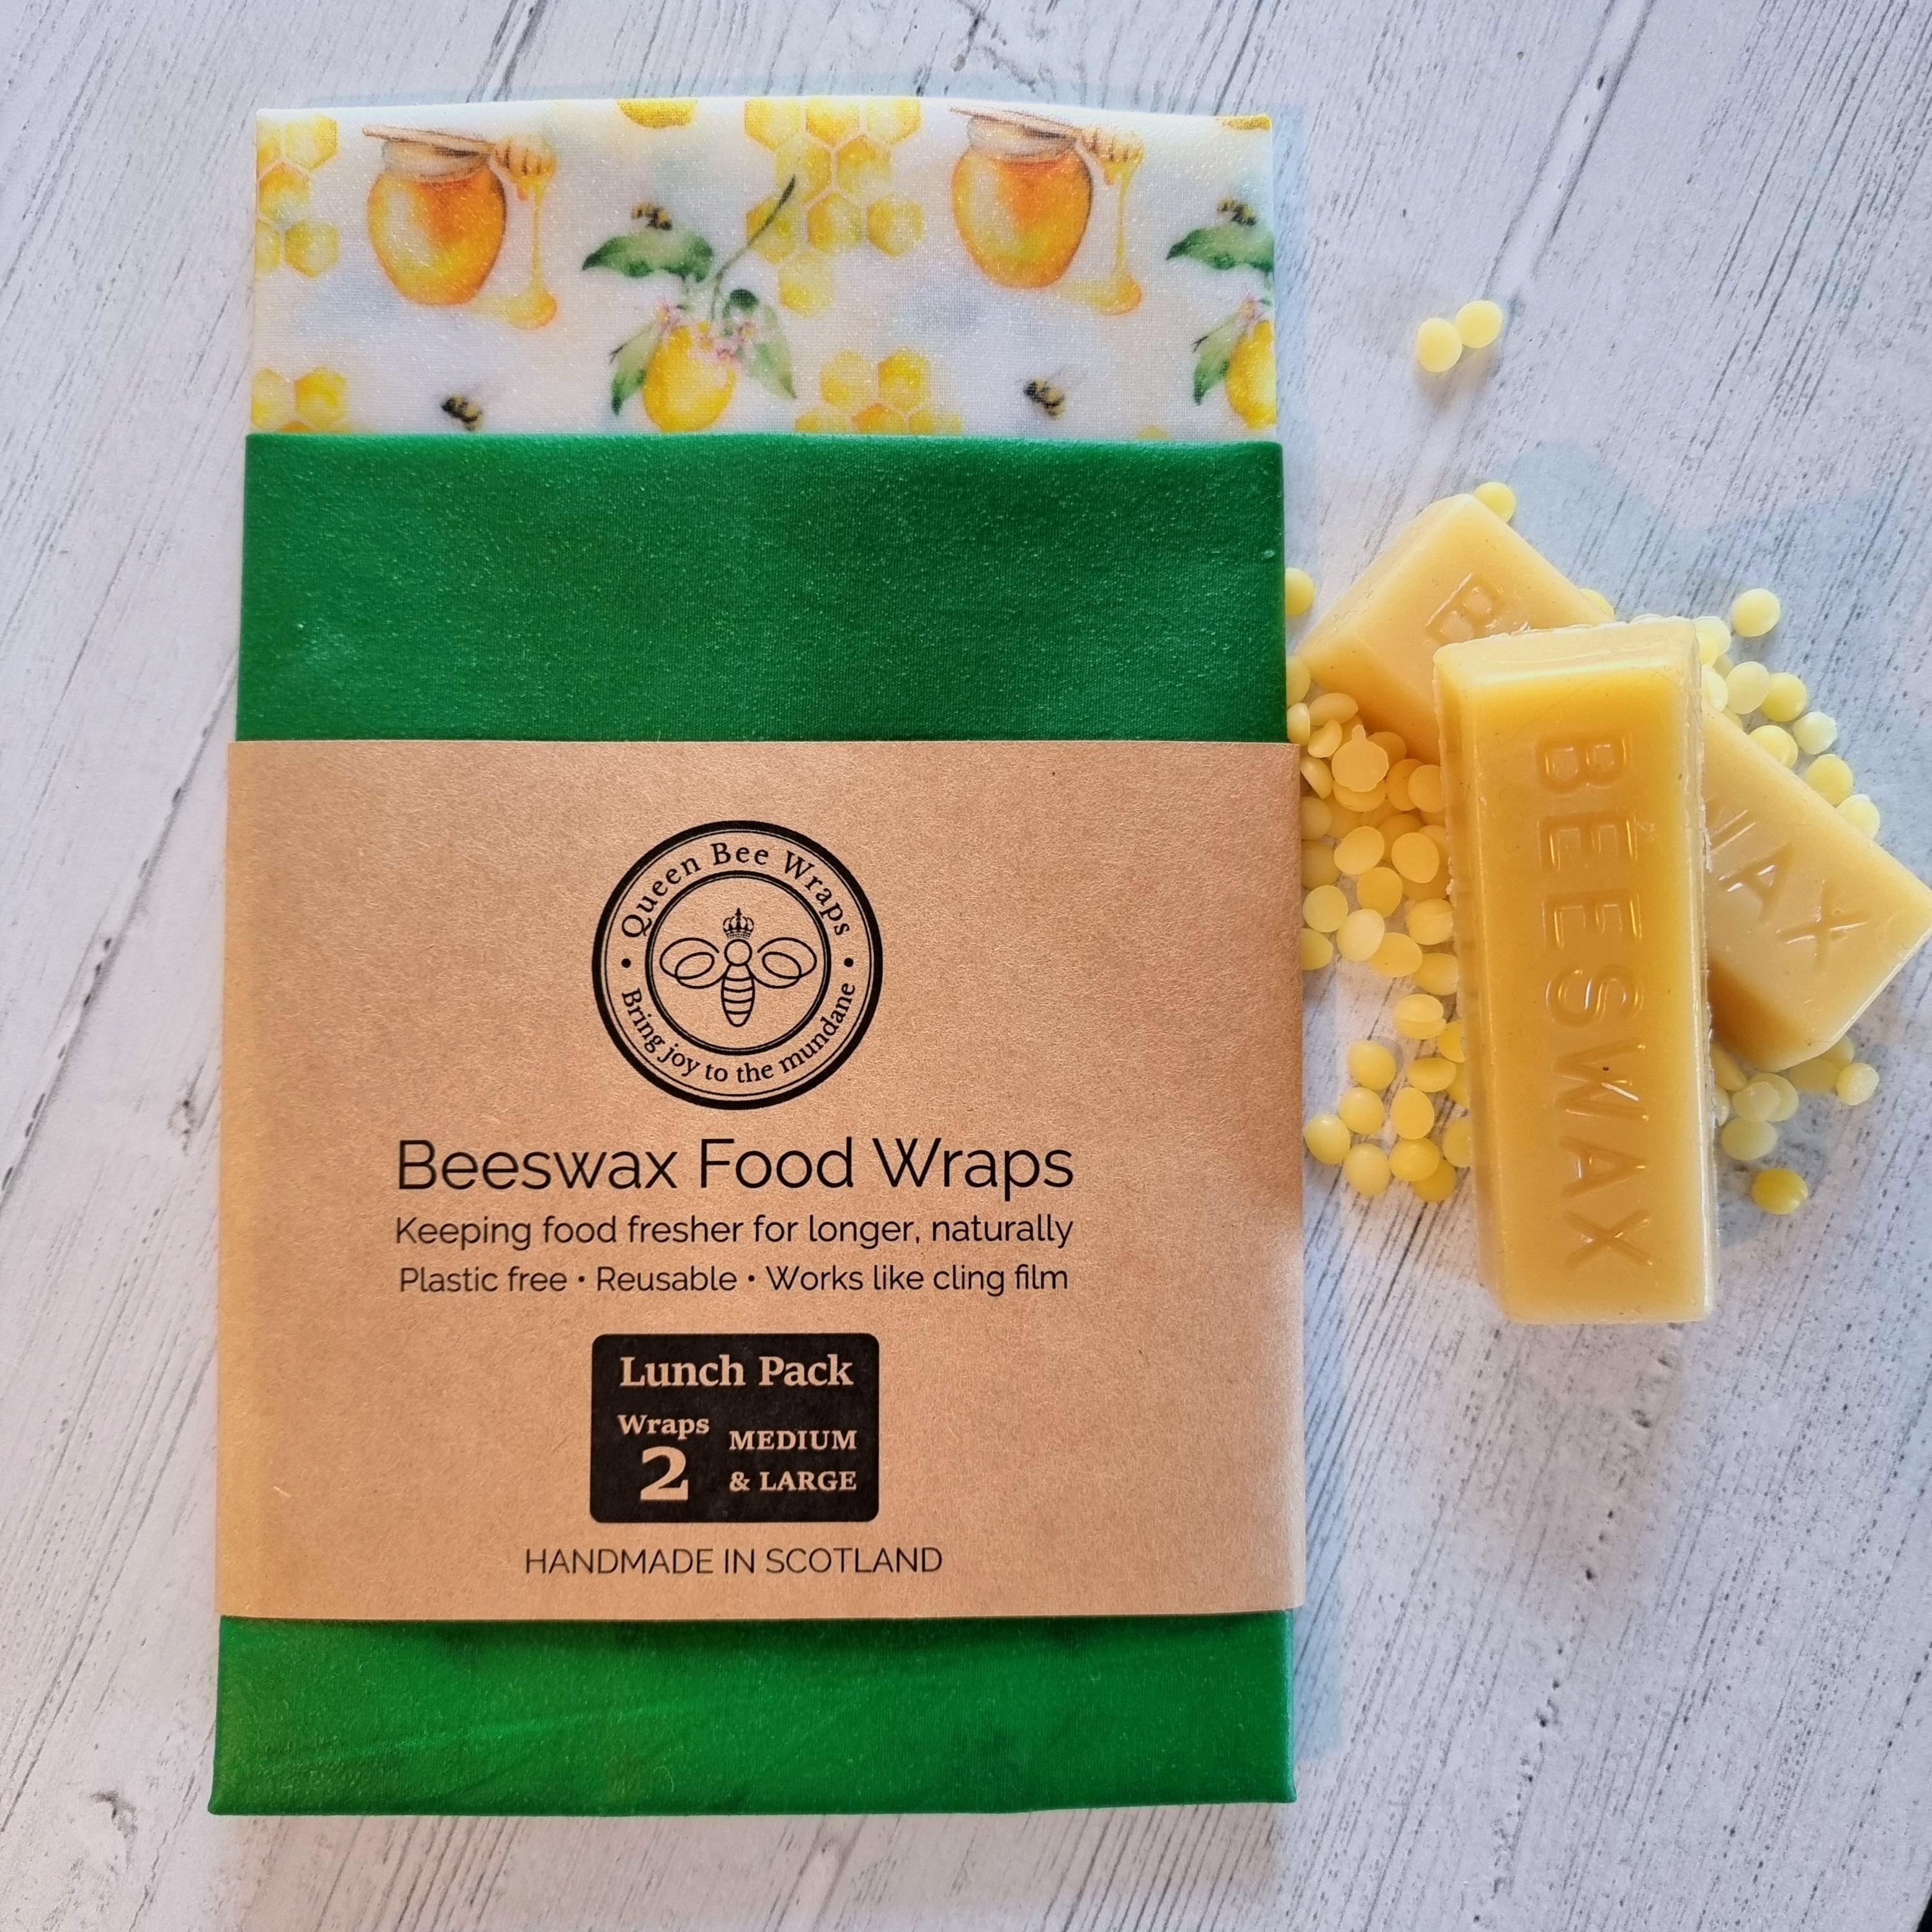 Food-grade Beeswax For Wraps